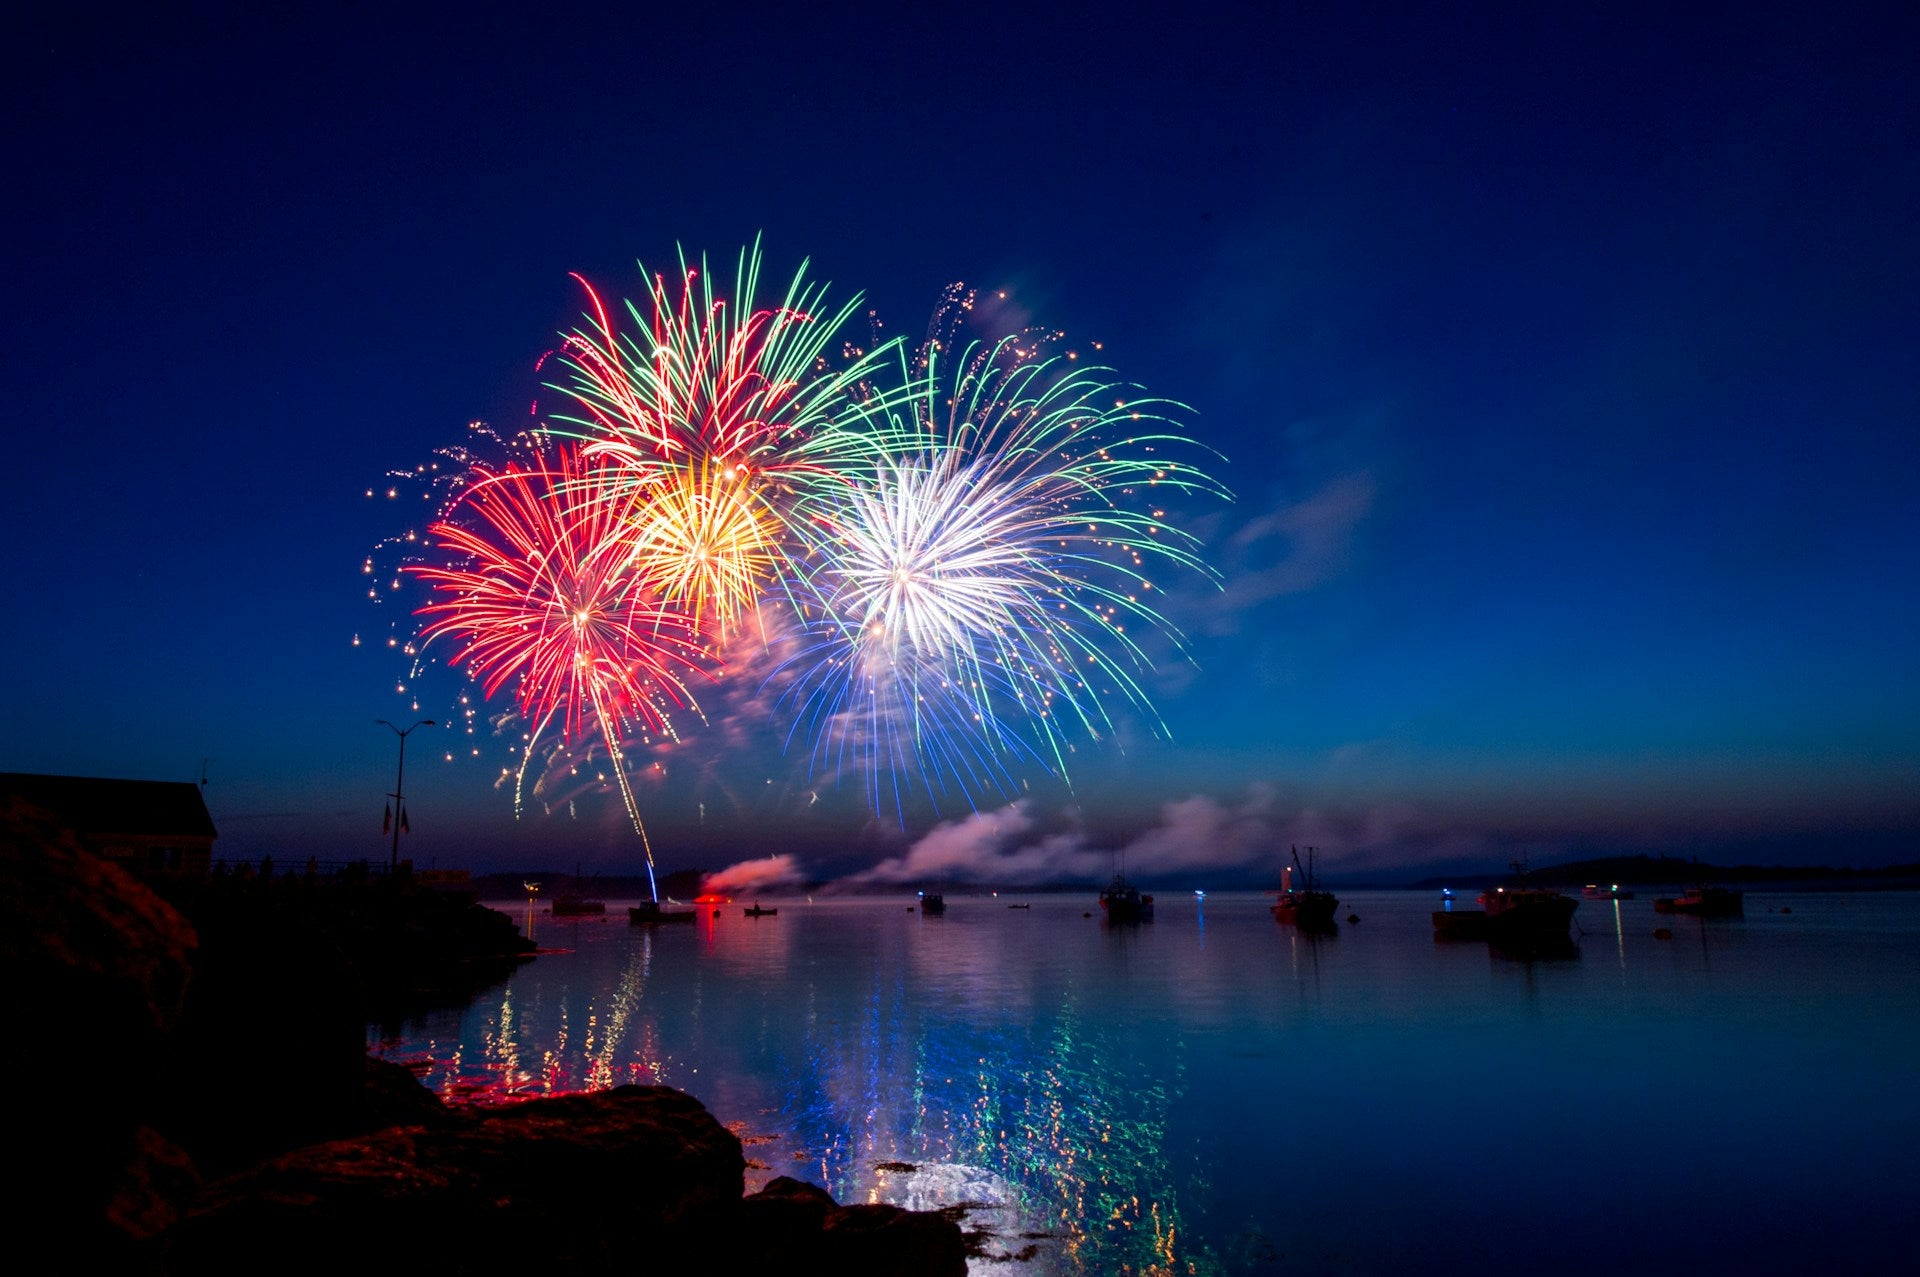 Fireworks over water.